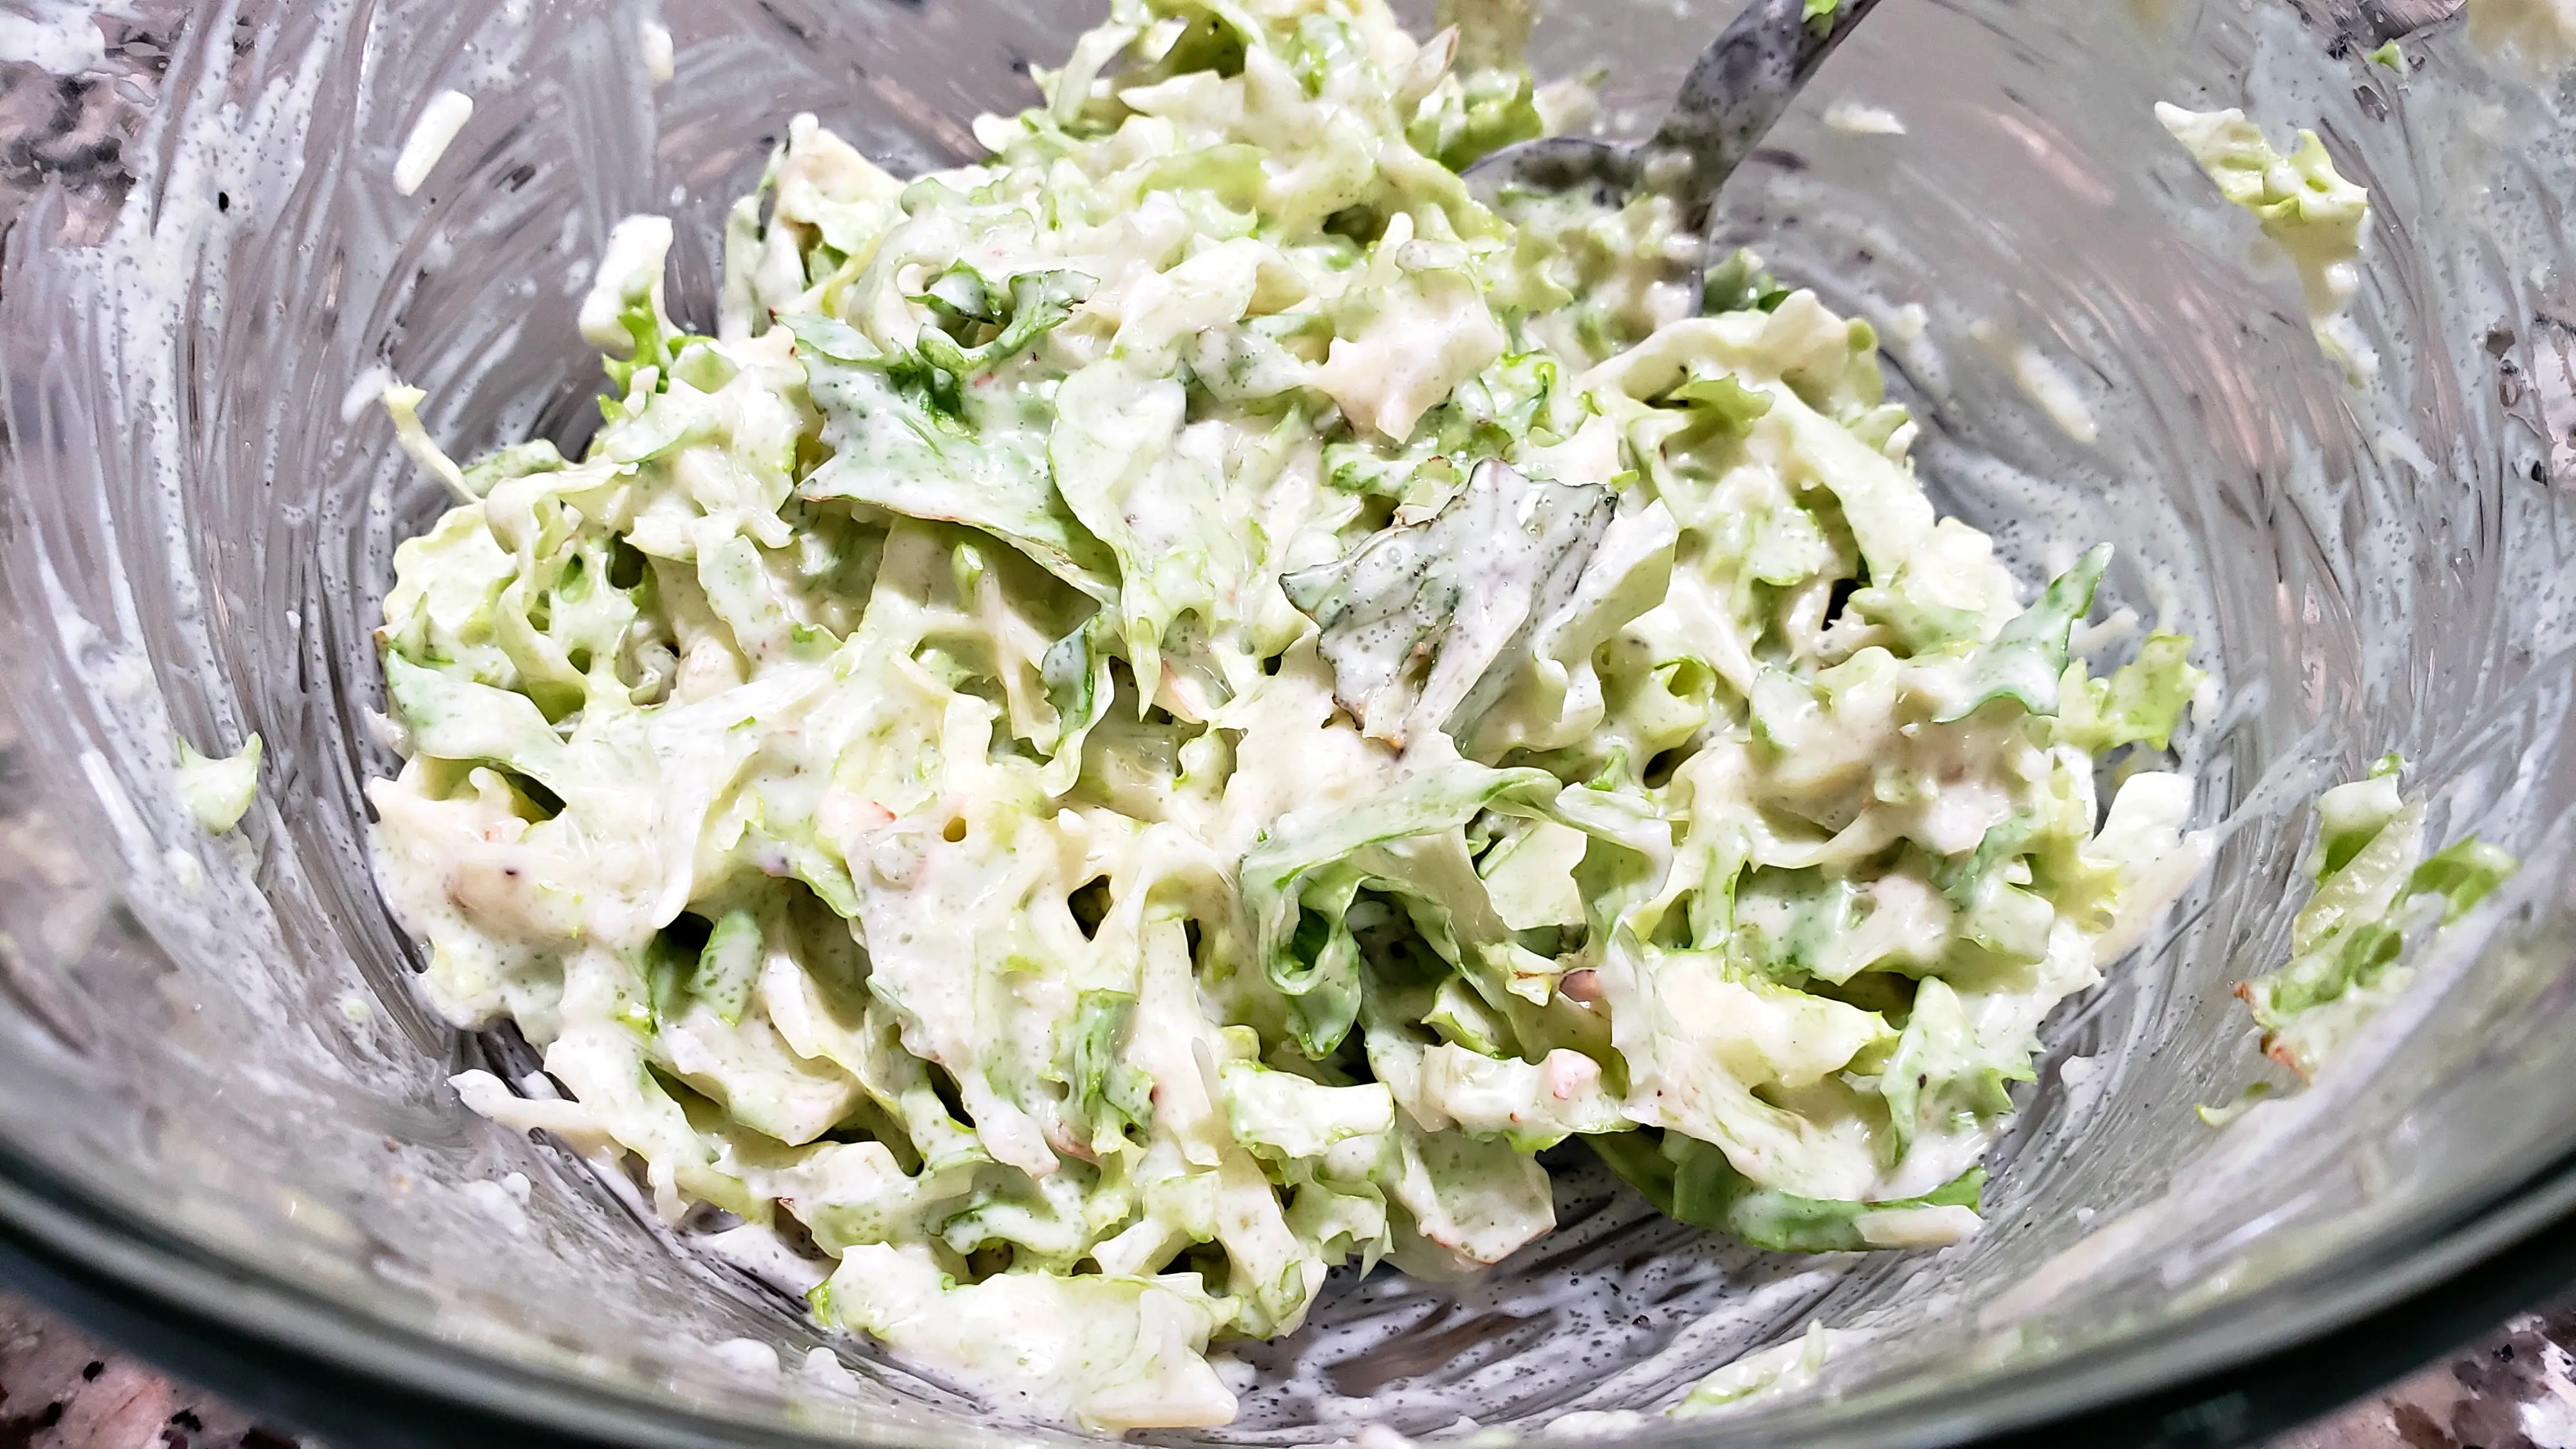 shredded lettuce mixed with creamy mayo and sugar mixture.